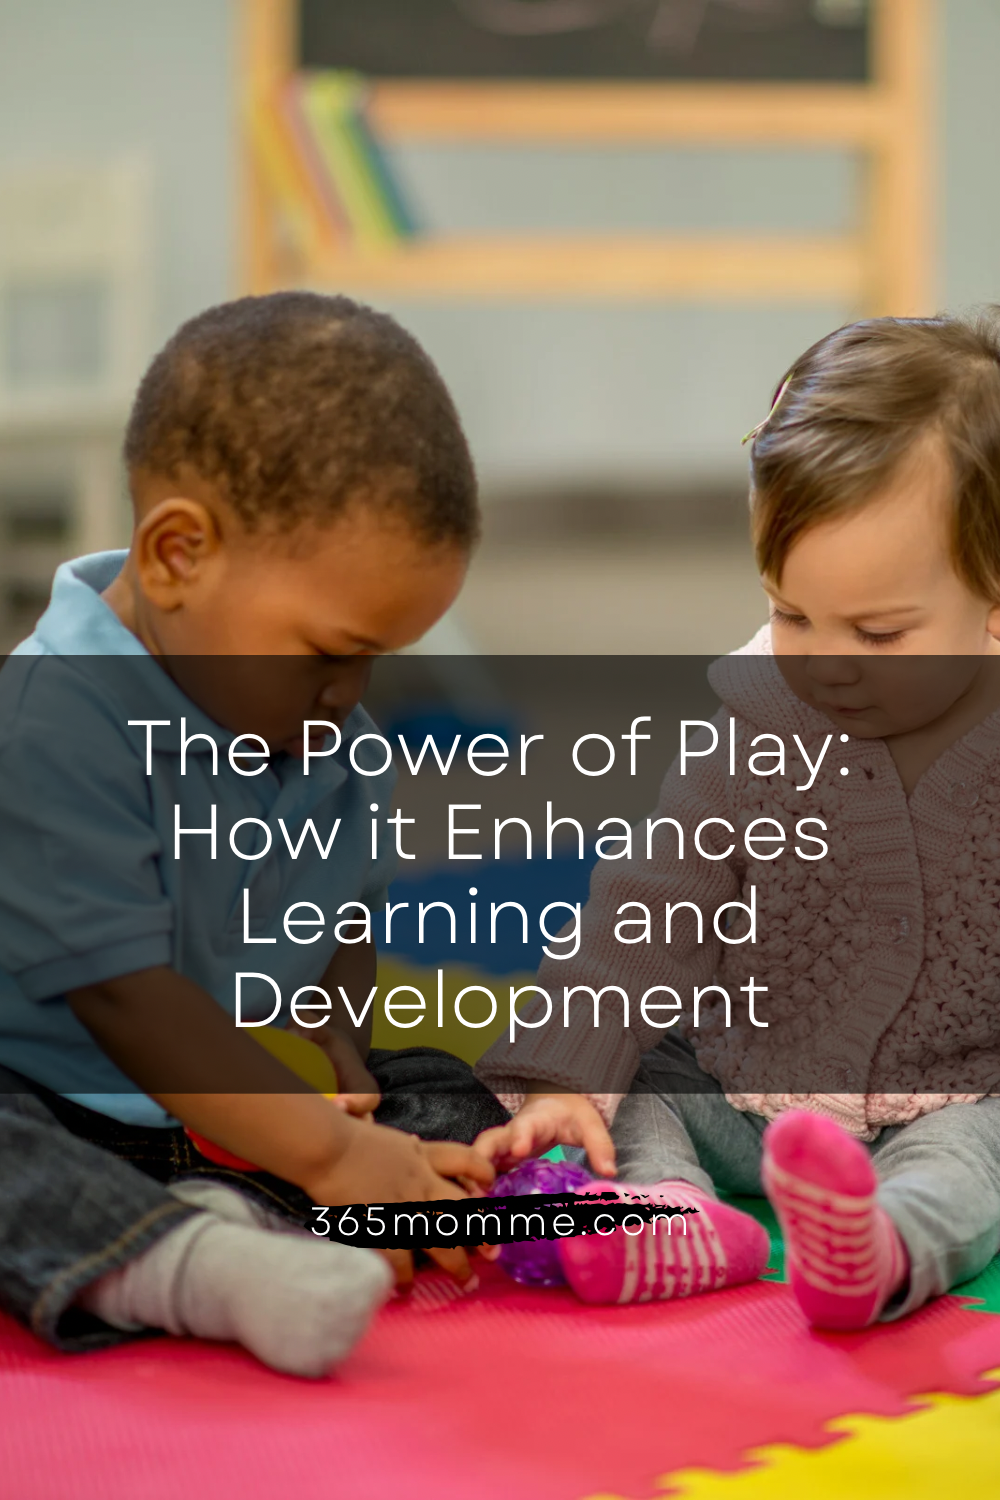 The Power of Play: How it Enhances Learning and Development